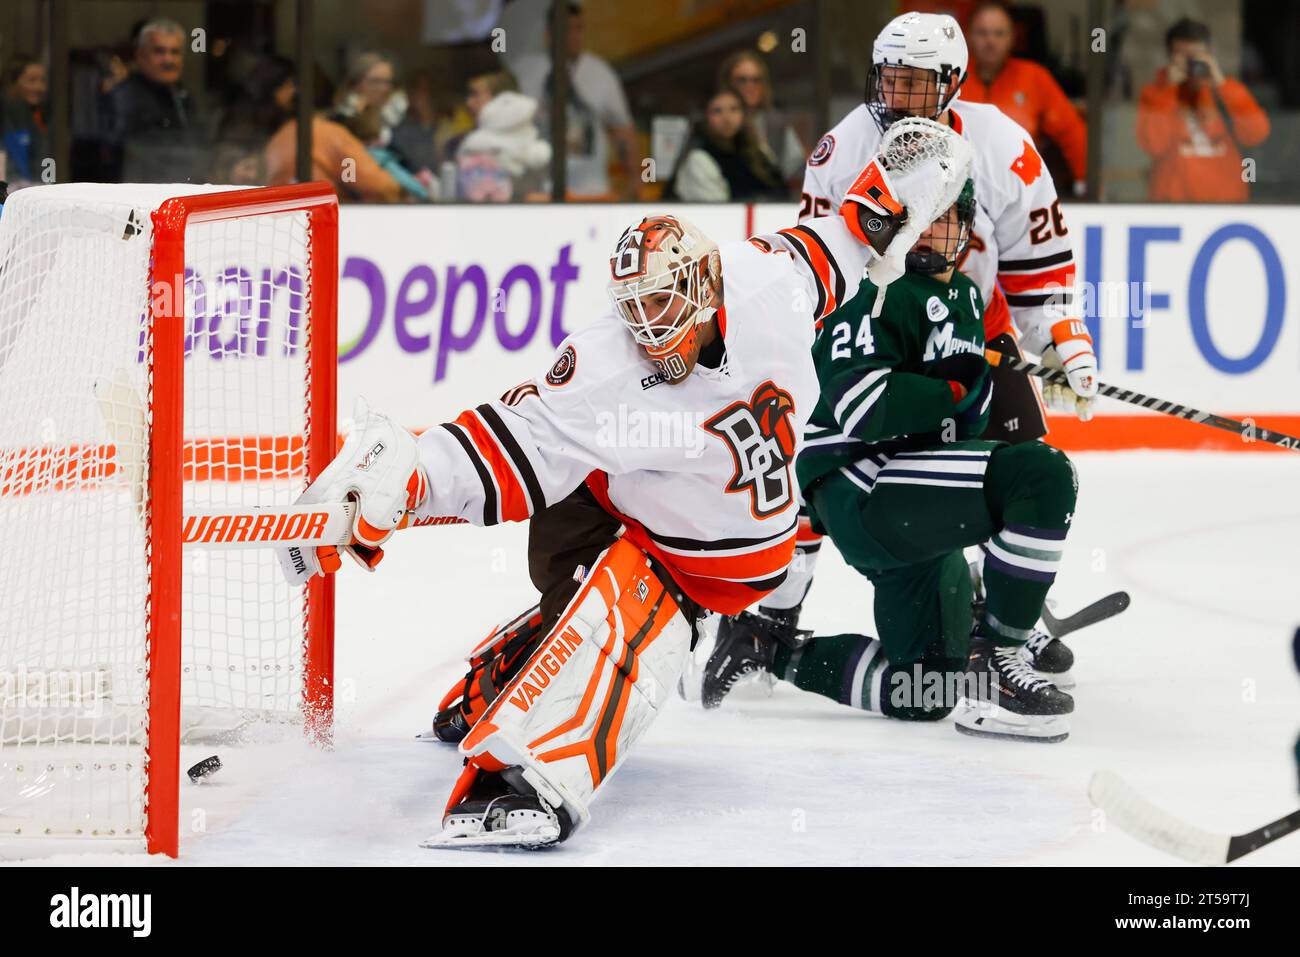 Bowling Green goaltender Christian Stoever (30) tries to make a save as the puck goes into the goal in the first period against the Mercyhurst during an NCAA hockey game on Friday, Nov. 3, 2023, in Bowling Green, Ohio. (AP Photo/Rick Osentoski) Stock Photo